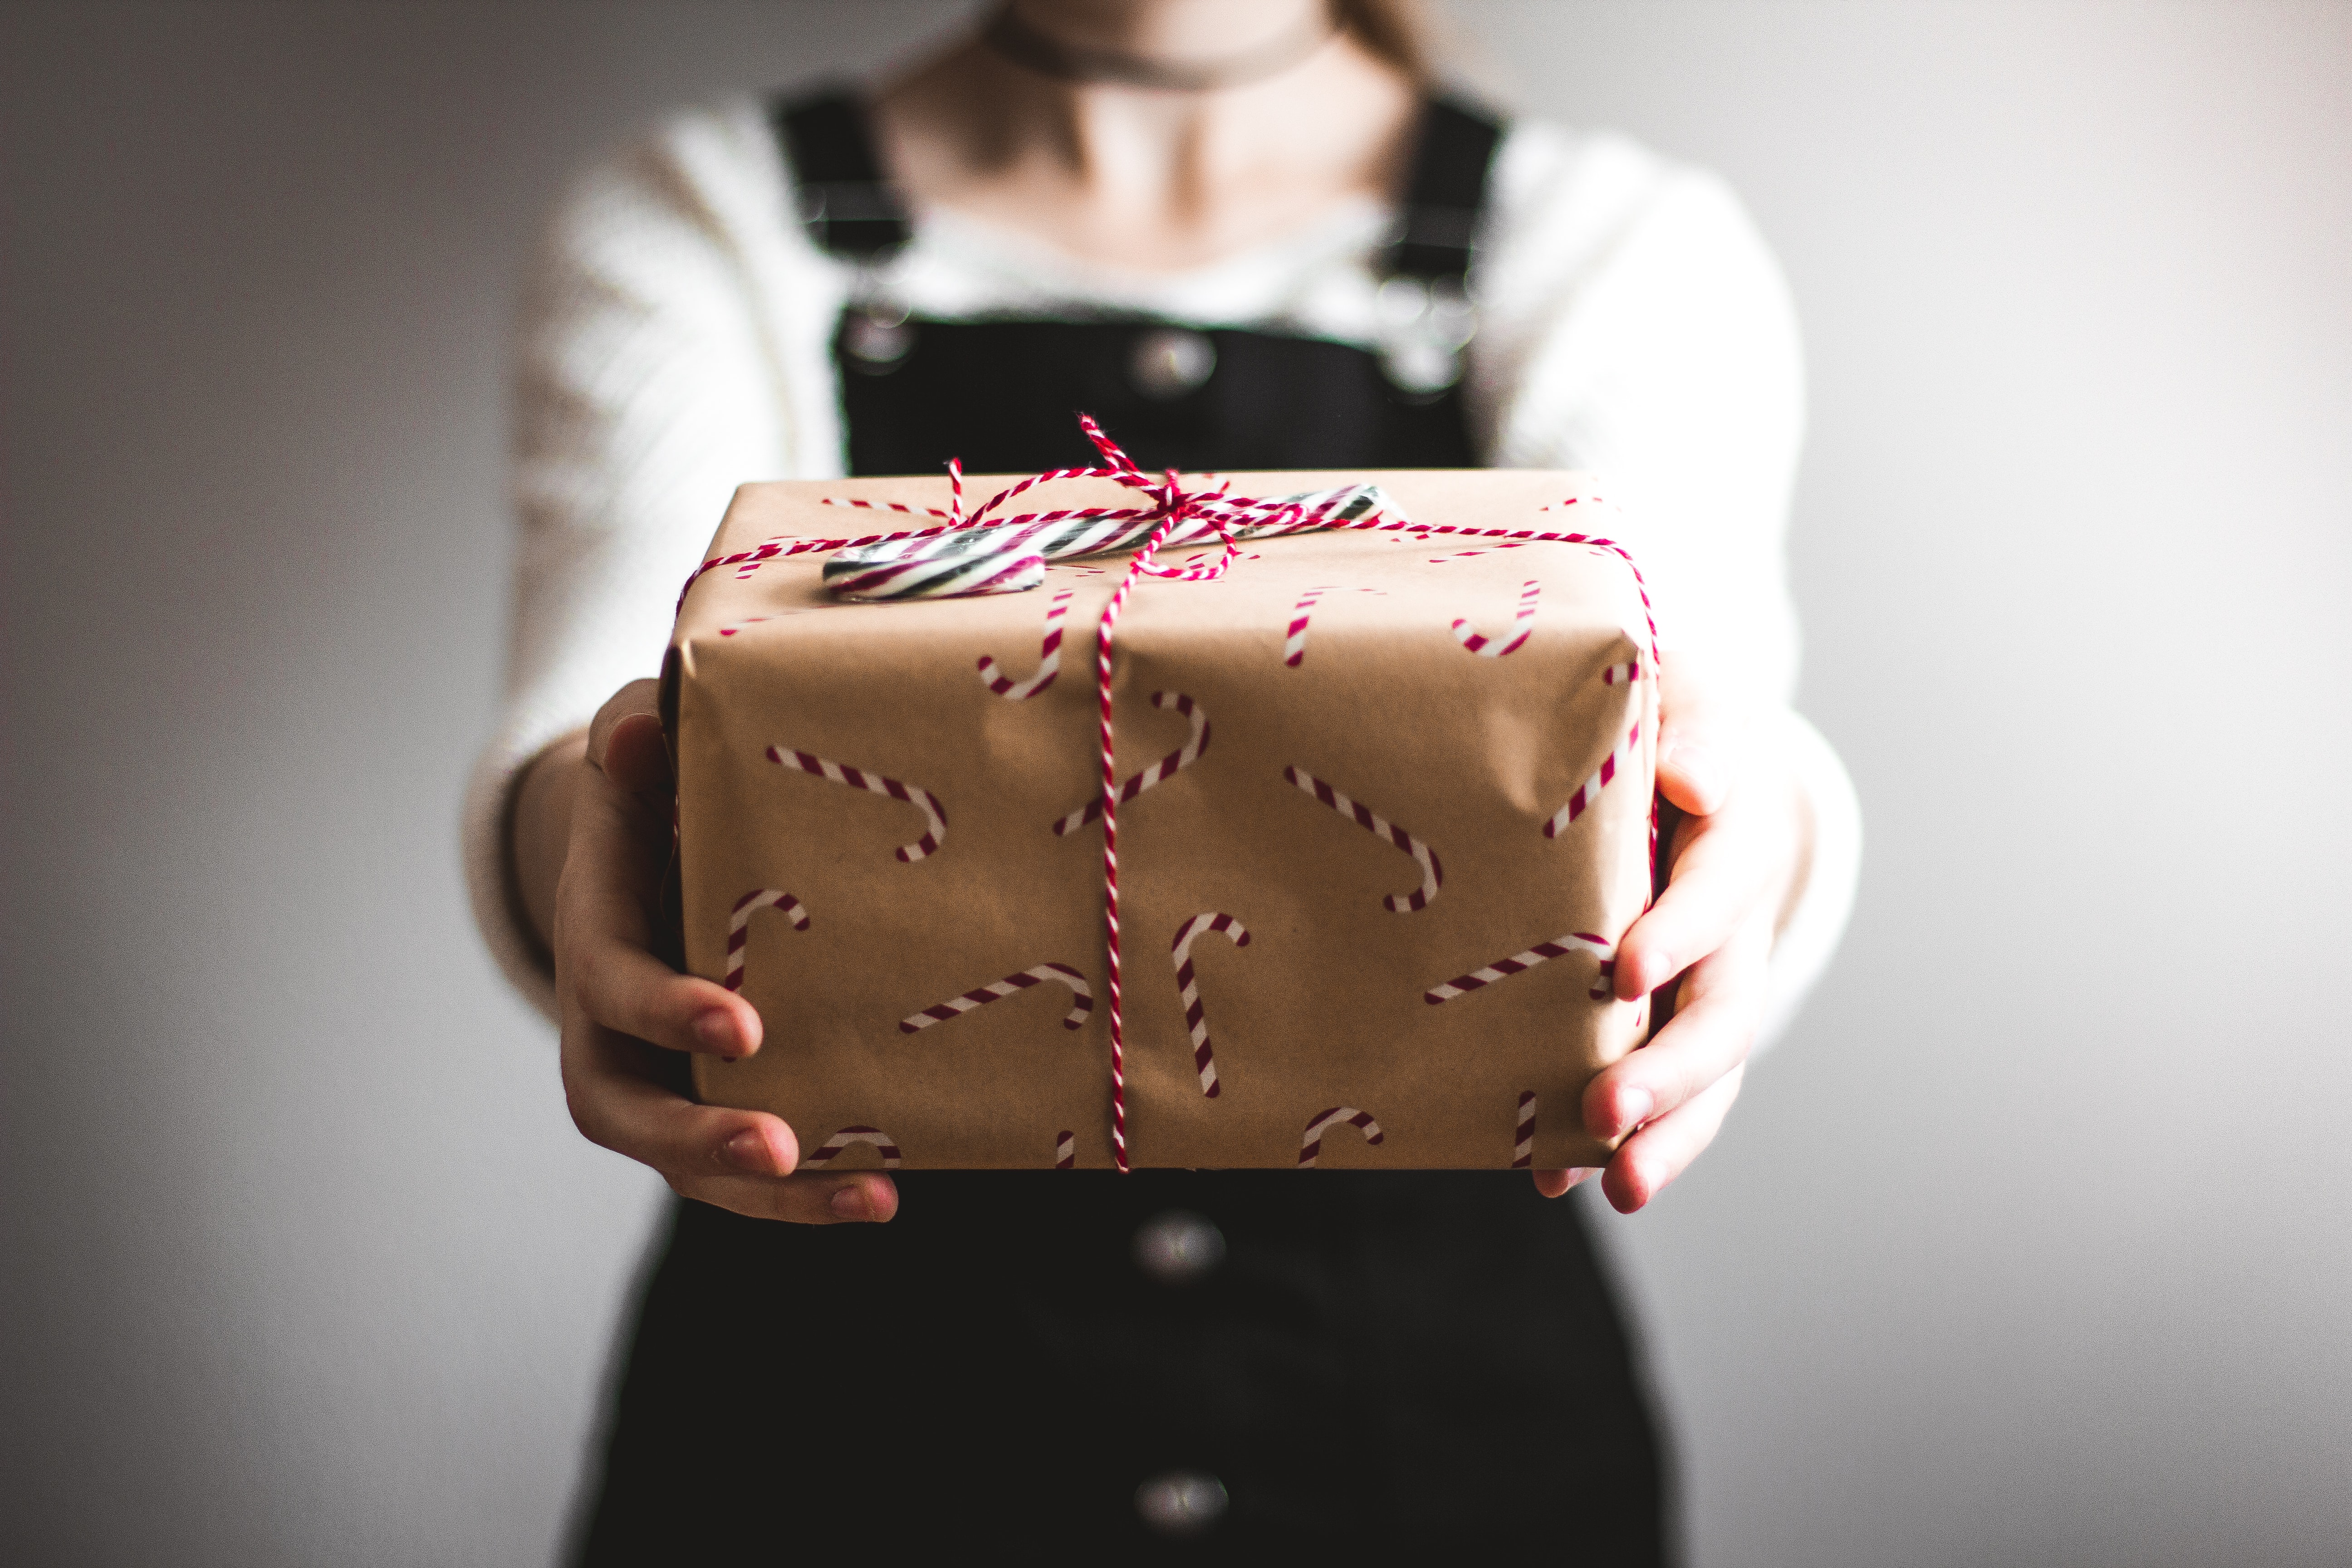 8 Reasons To Continue Your Job Search During The Holidays